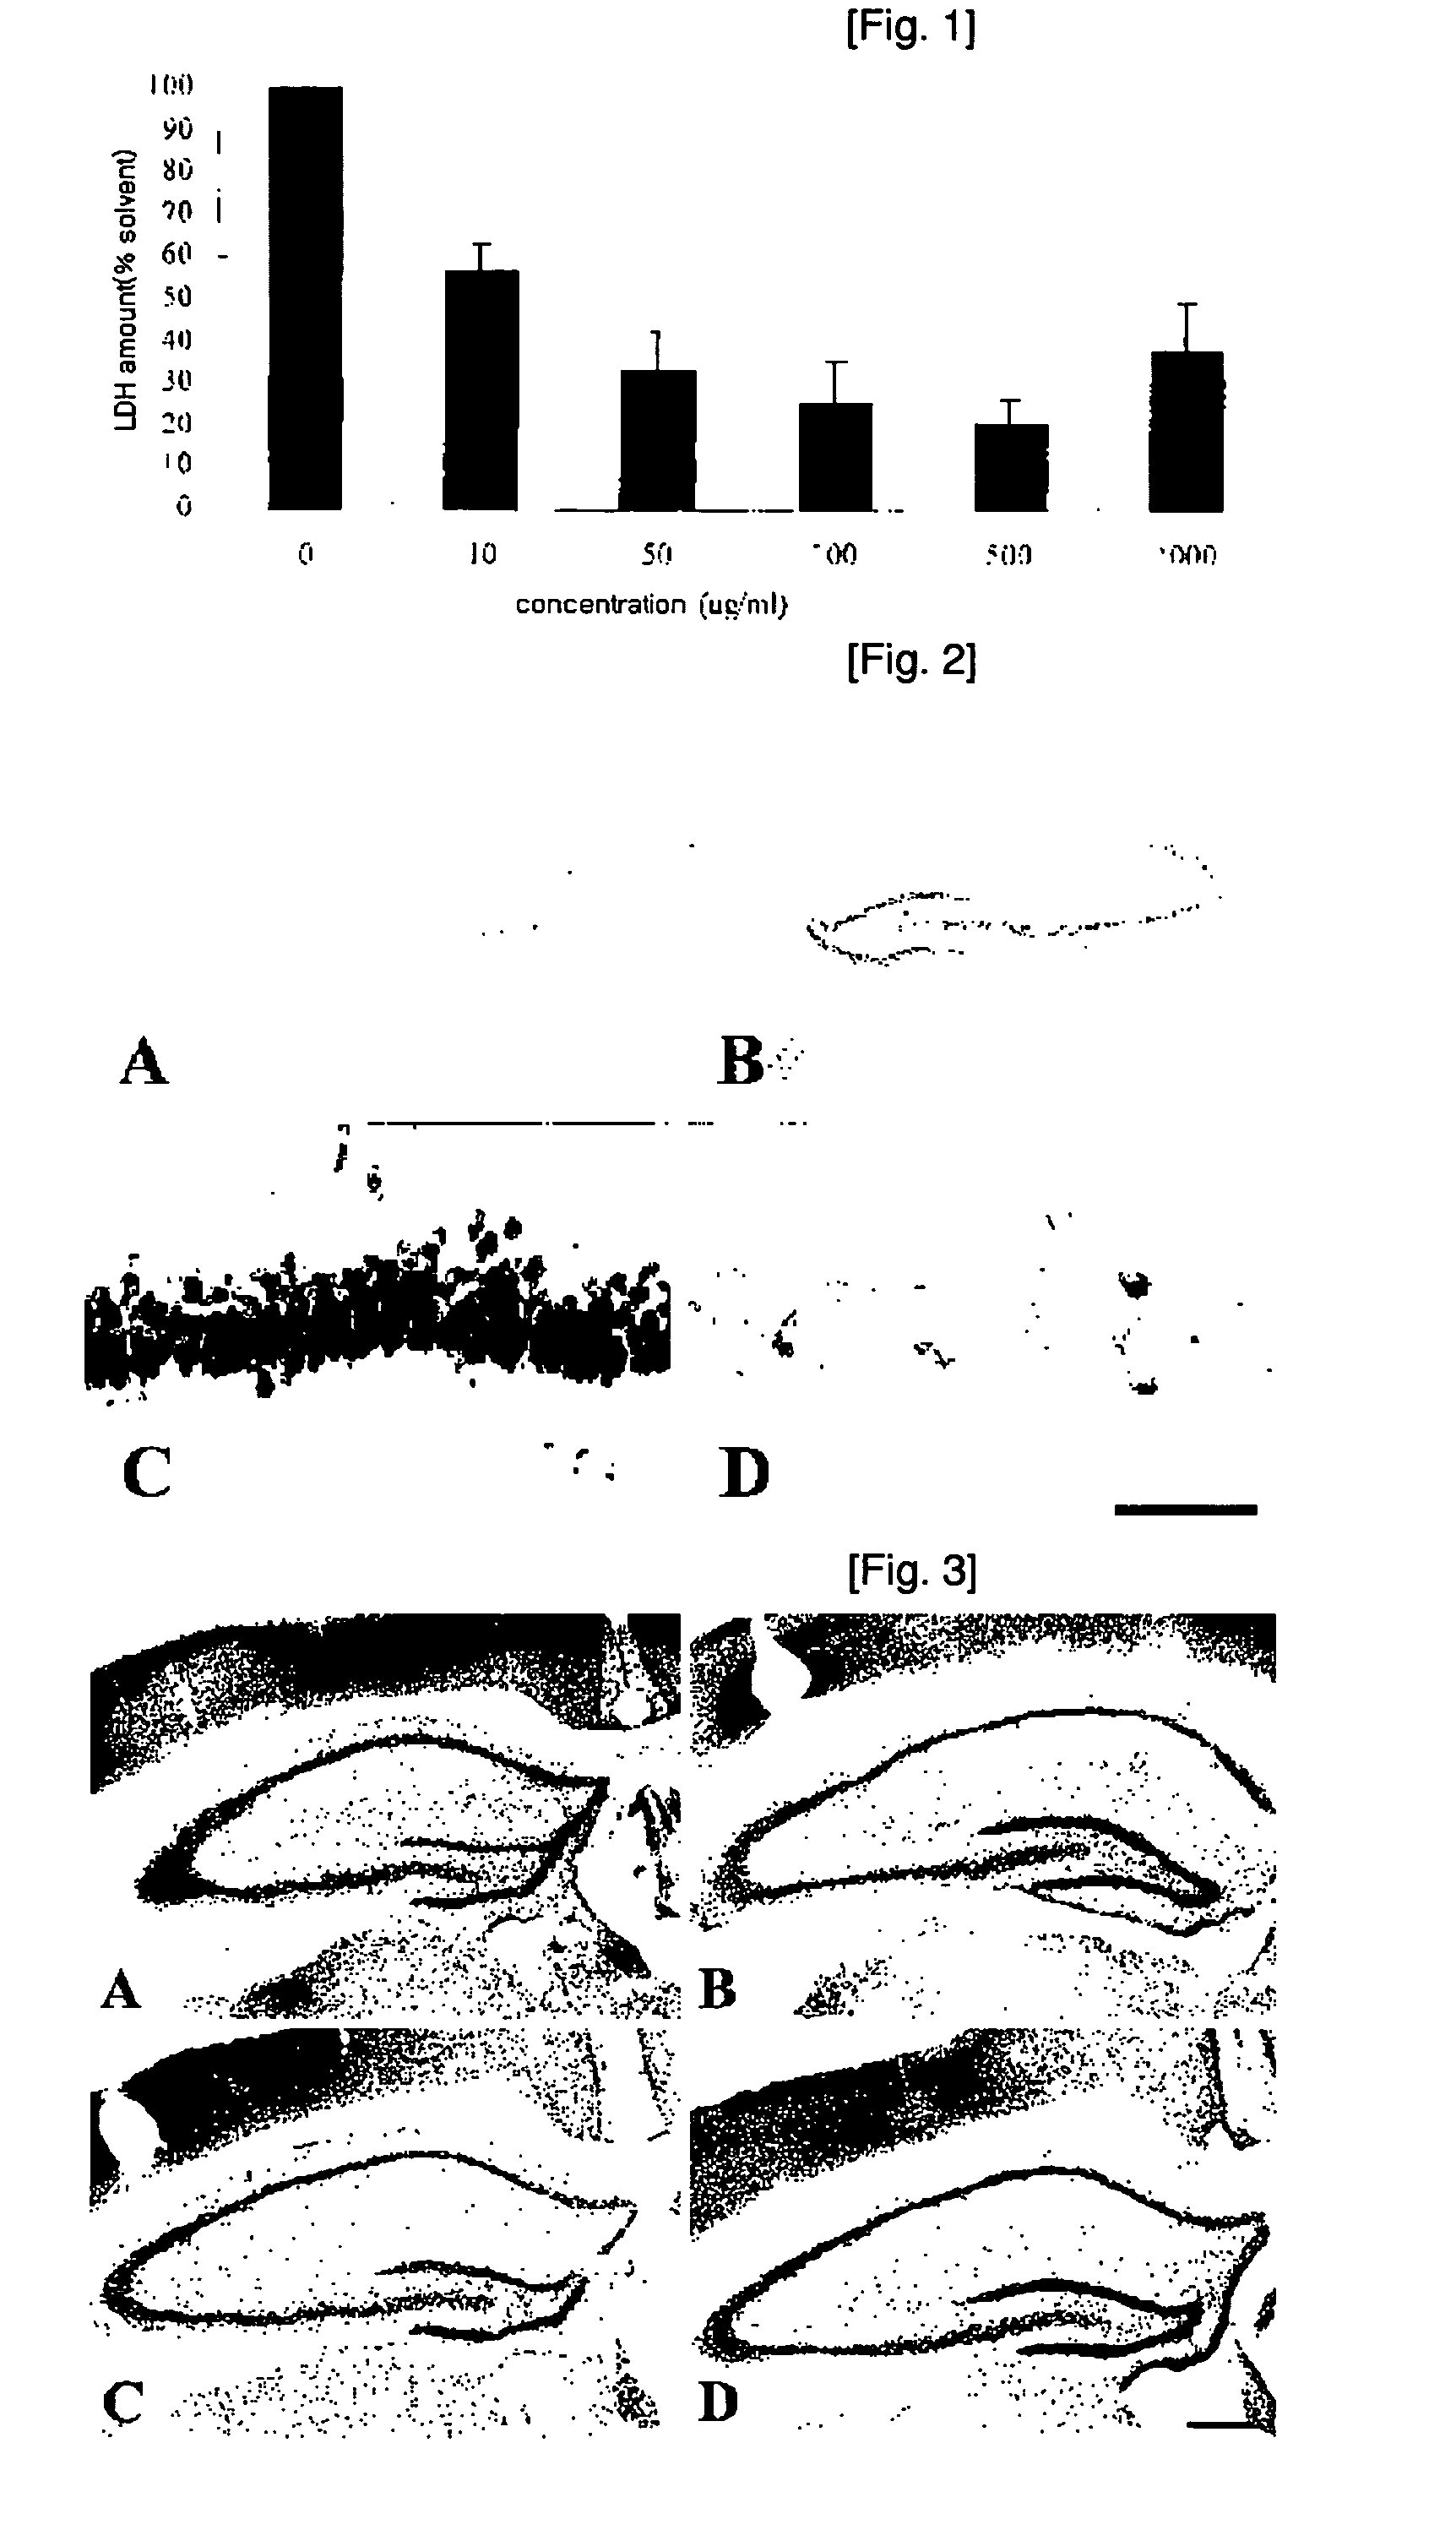 Grape seed extract having neuronal cell-protection activity and the composition comprising the same for preventing and treating degenerative brain disease